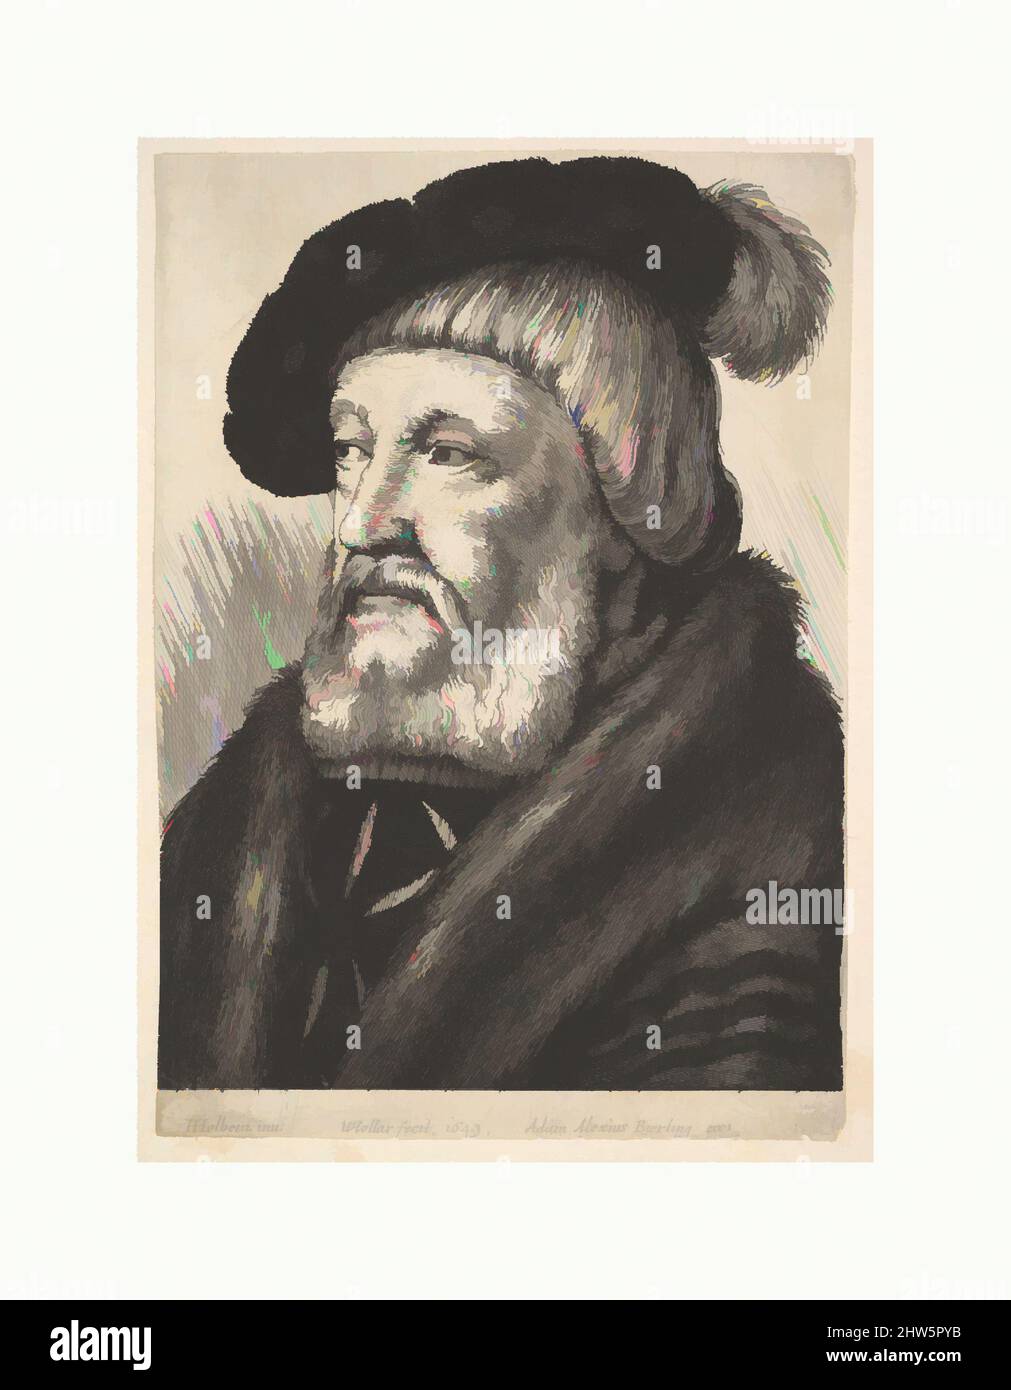 Art inspired by Sir William Butts, 1649, Etching, first state of three NH), Sheet: 5 3/16 × 3 5/8 in. (13.2 × 9.2 cm), Prints, After Hans Holbein the Younger (German, Augsburg 1497/98–1543 London), Portrait of an elderly man with grey straight hair covering his ears, moustache and, Classic works modernized by Artotop with a splash of modernity. Shapes, color and value, eye-catching visual impact on art. Emotions through freedom of artworks in a contemporary way. A timeless message pursuing a wildly creative new direction. Artists turning to the digital medium and creating the Artotop NFT Stock Photo